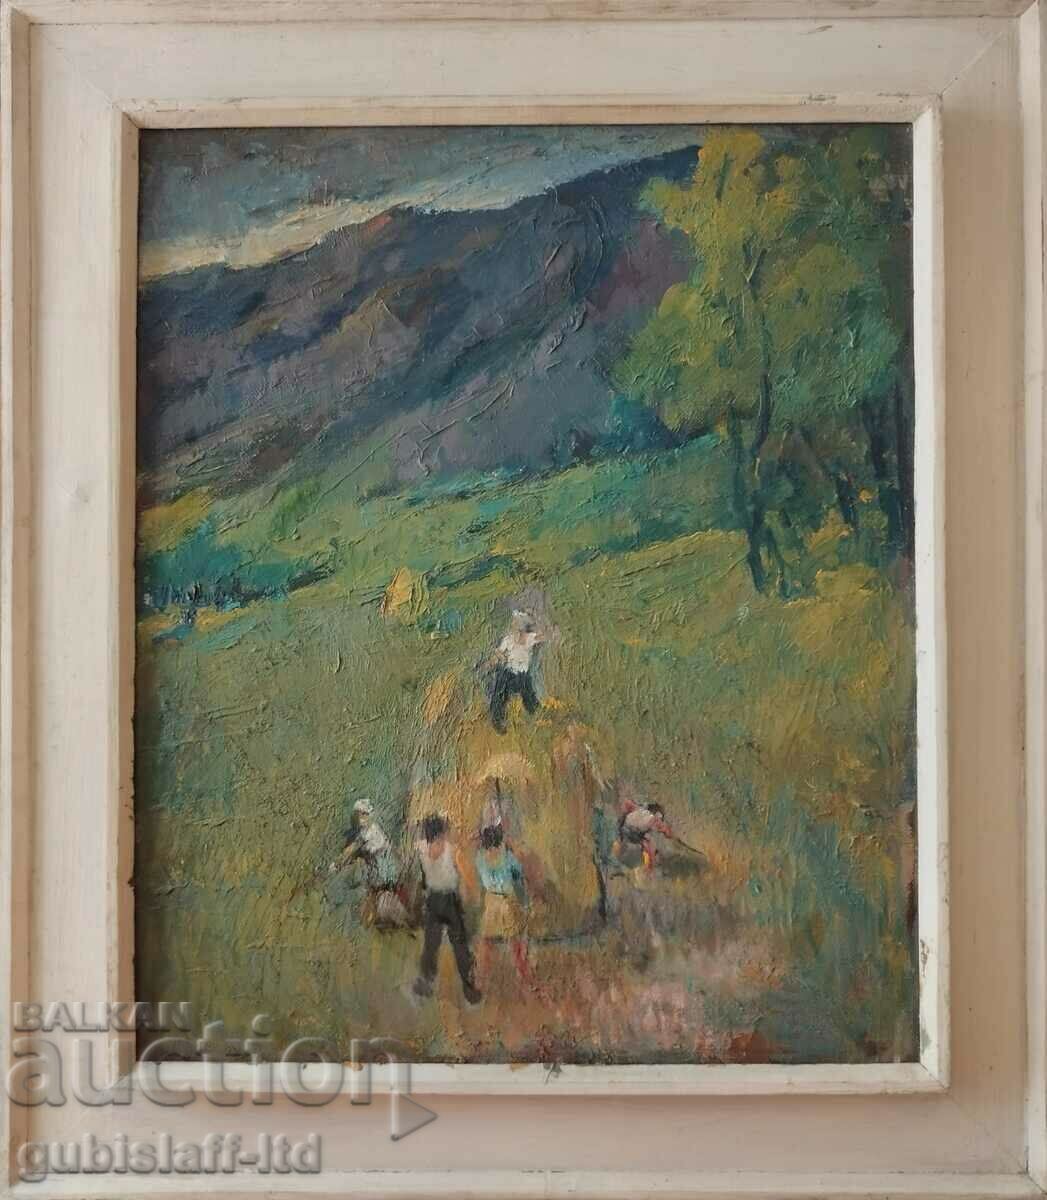 Painting, collecting hay, D. Todorov-Zharava (1901-1988)